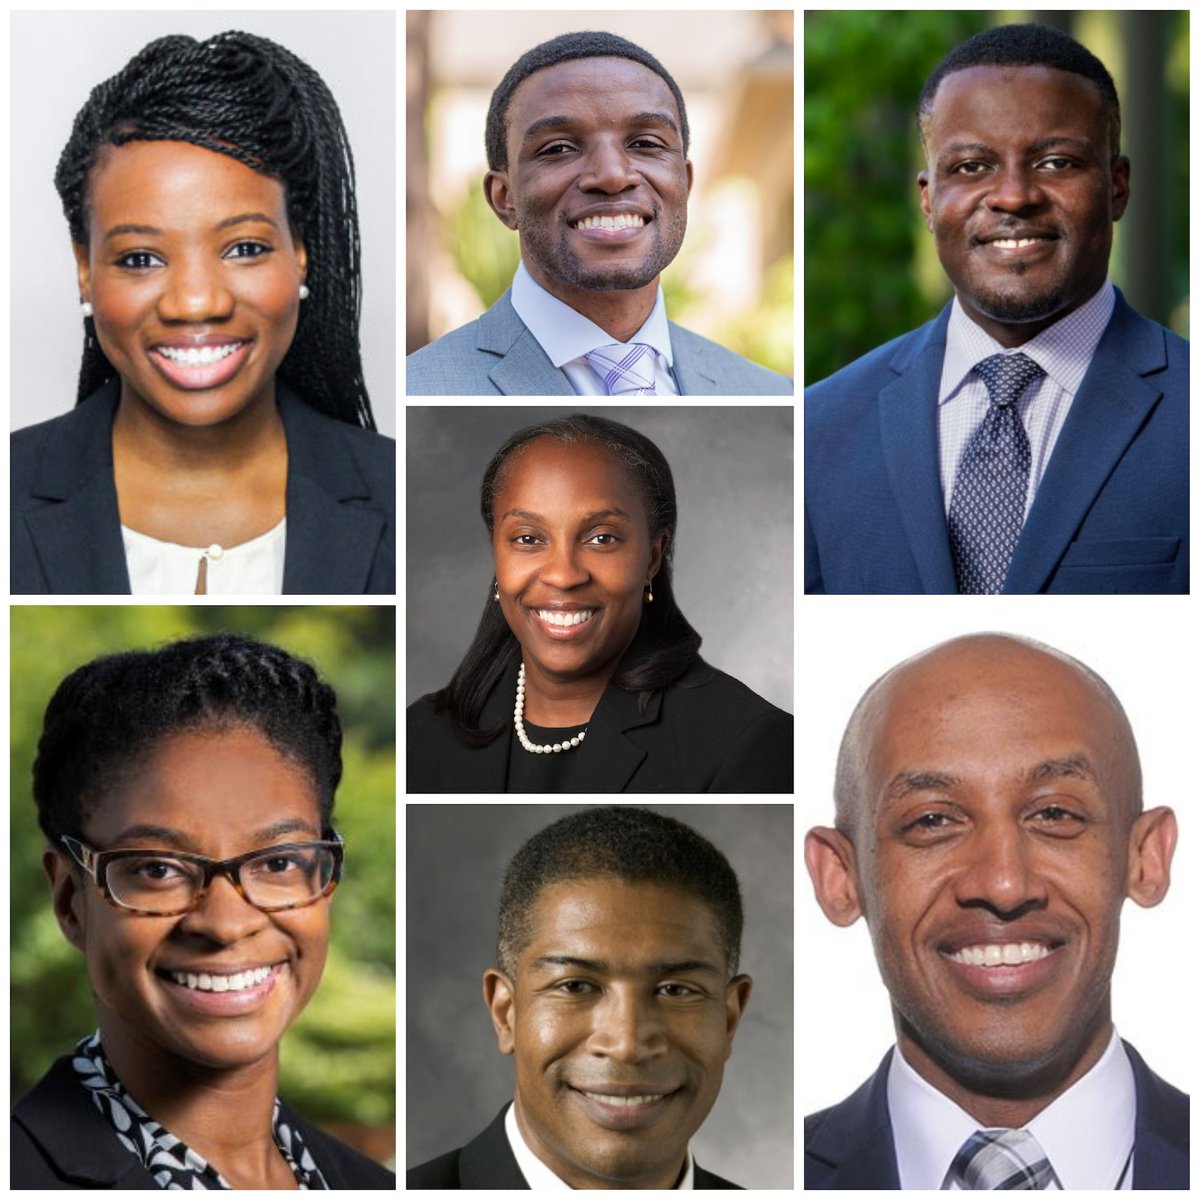 Historically, Black/African Americans have been vastly underrepresented in surgical fields. At Stanford Neurosurgery, we celebrate #BlackHistoryMonth and the neurosurgeons who make trailblazing contributions daily. #BHM